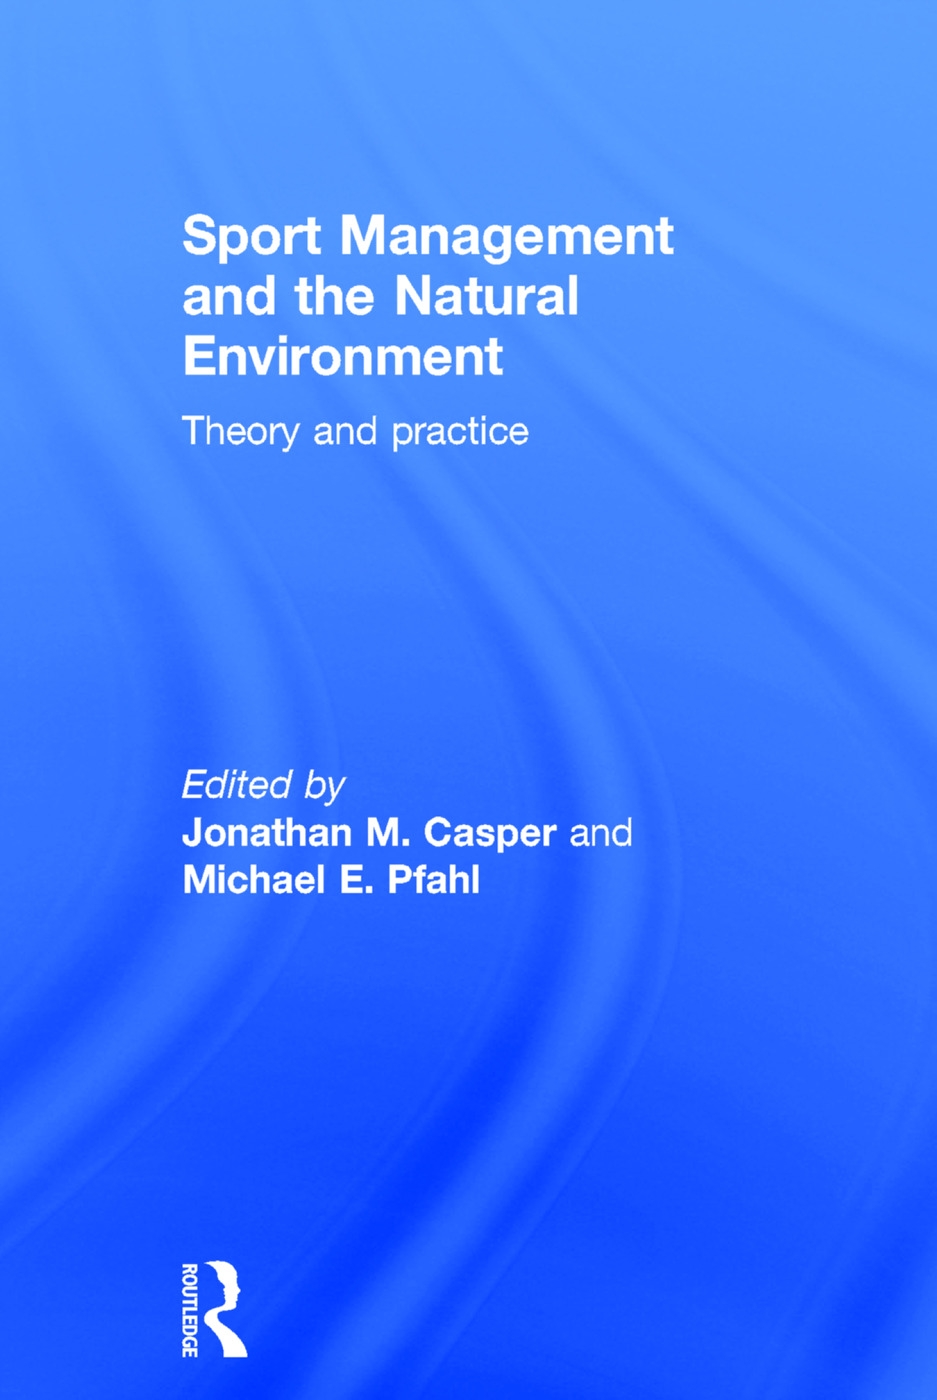 Sport Management and the Natural Environment: Theory and Practice